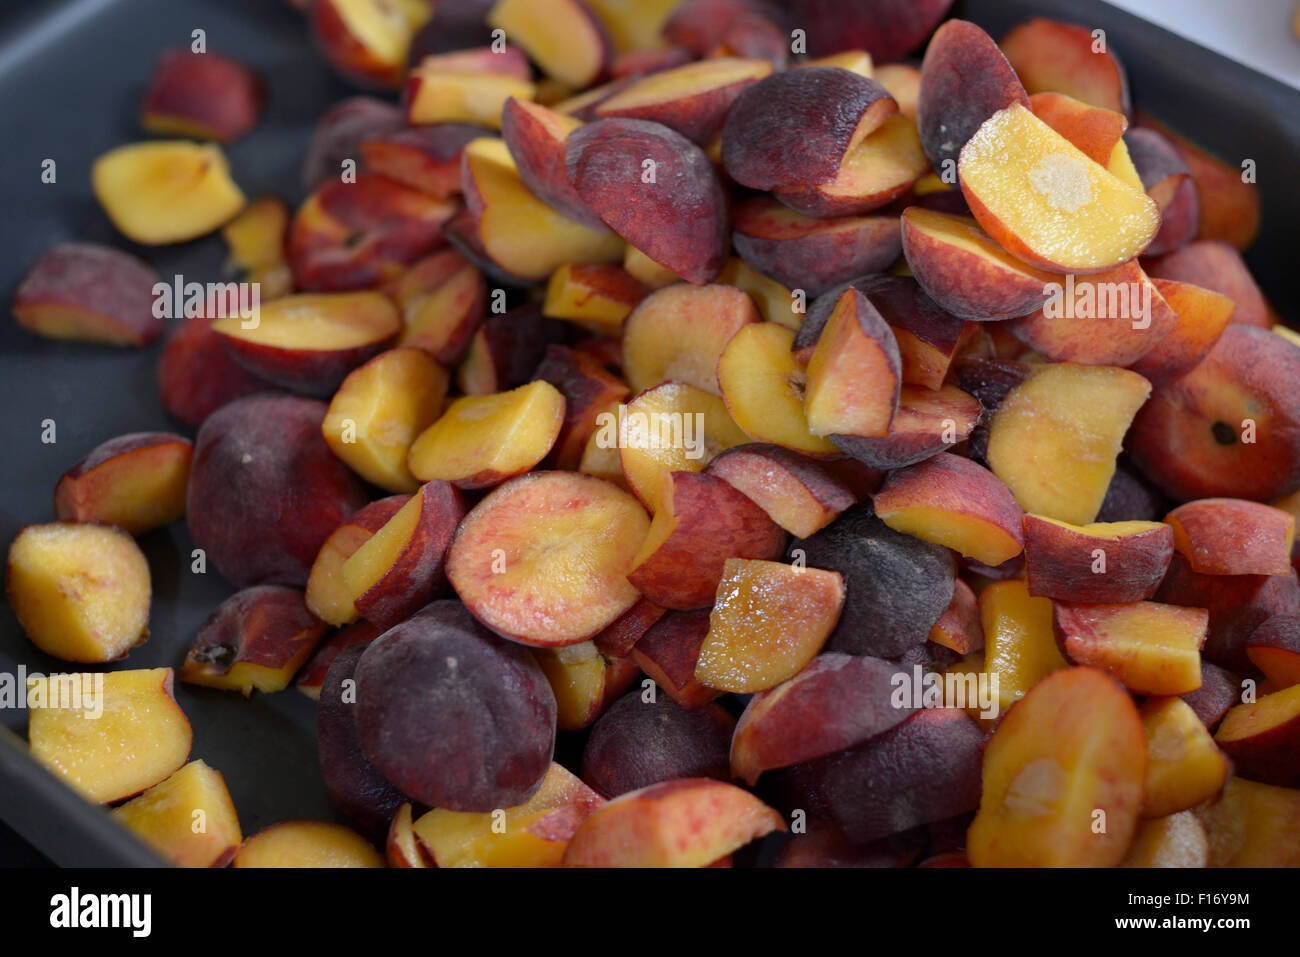 Chopped peaches in a baking tray. Stock Photo